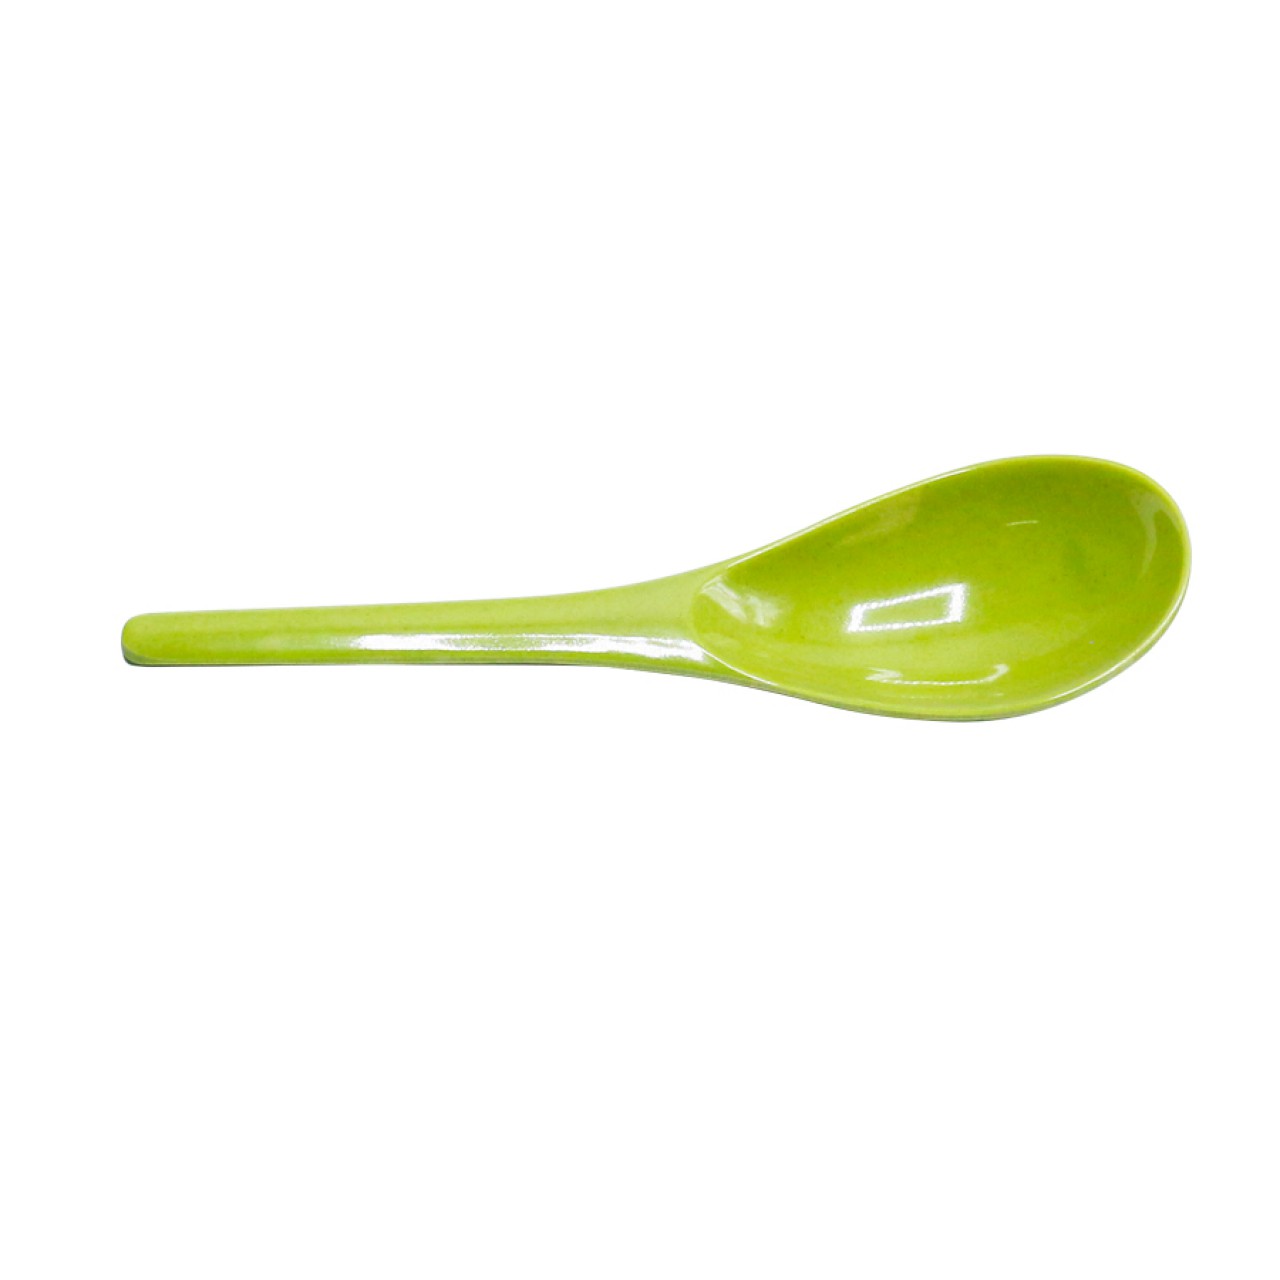 MELASRVGSPOON-PW-AAA-1216 G